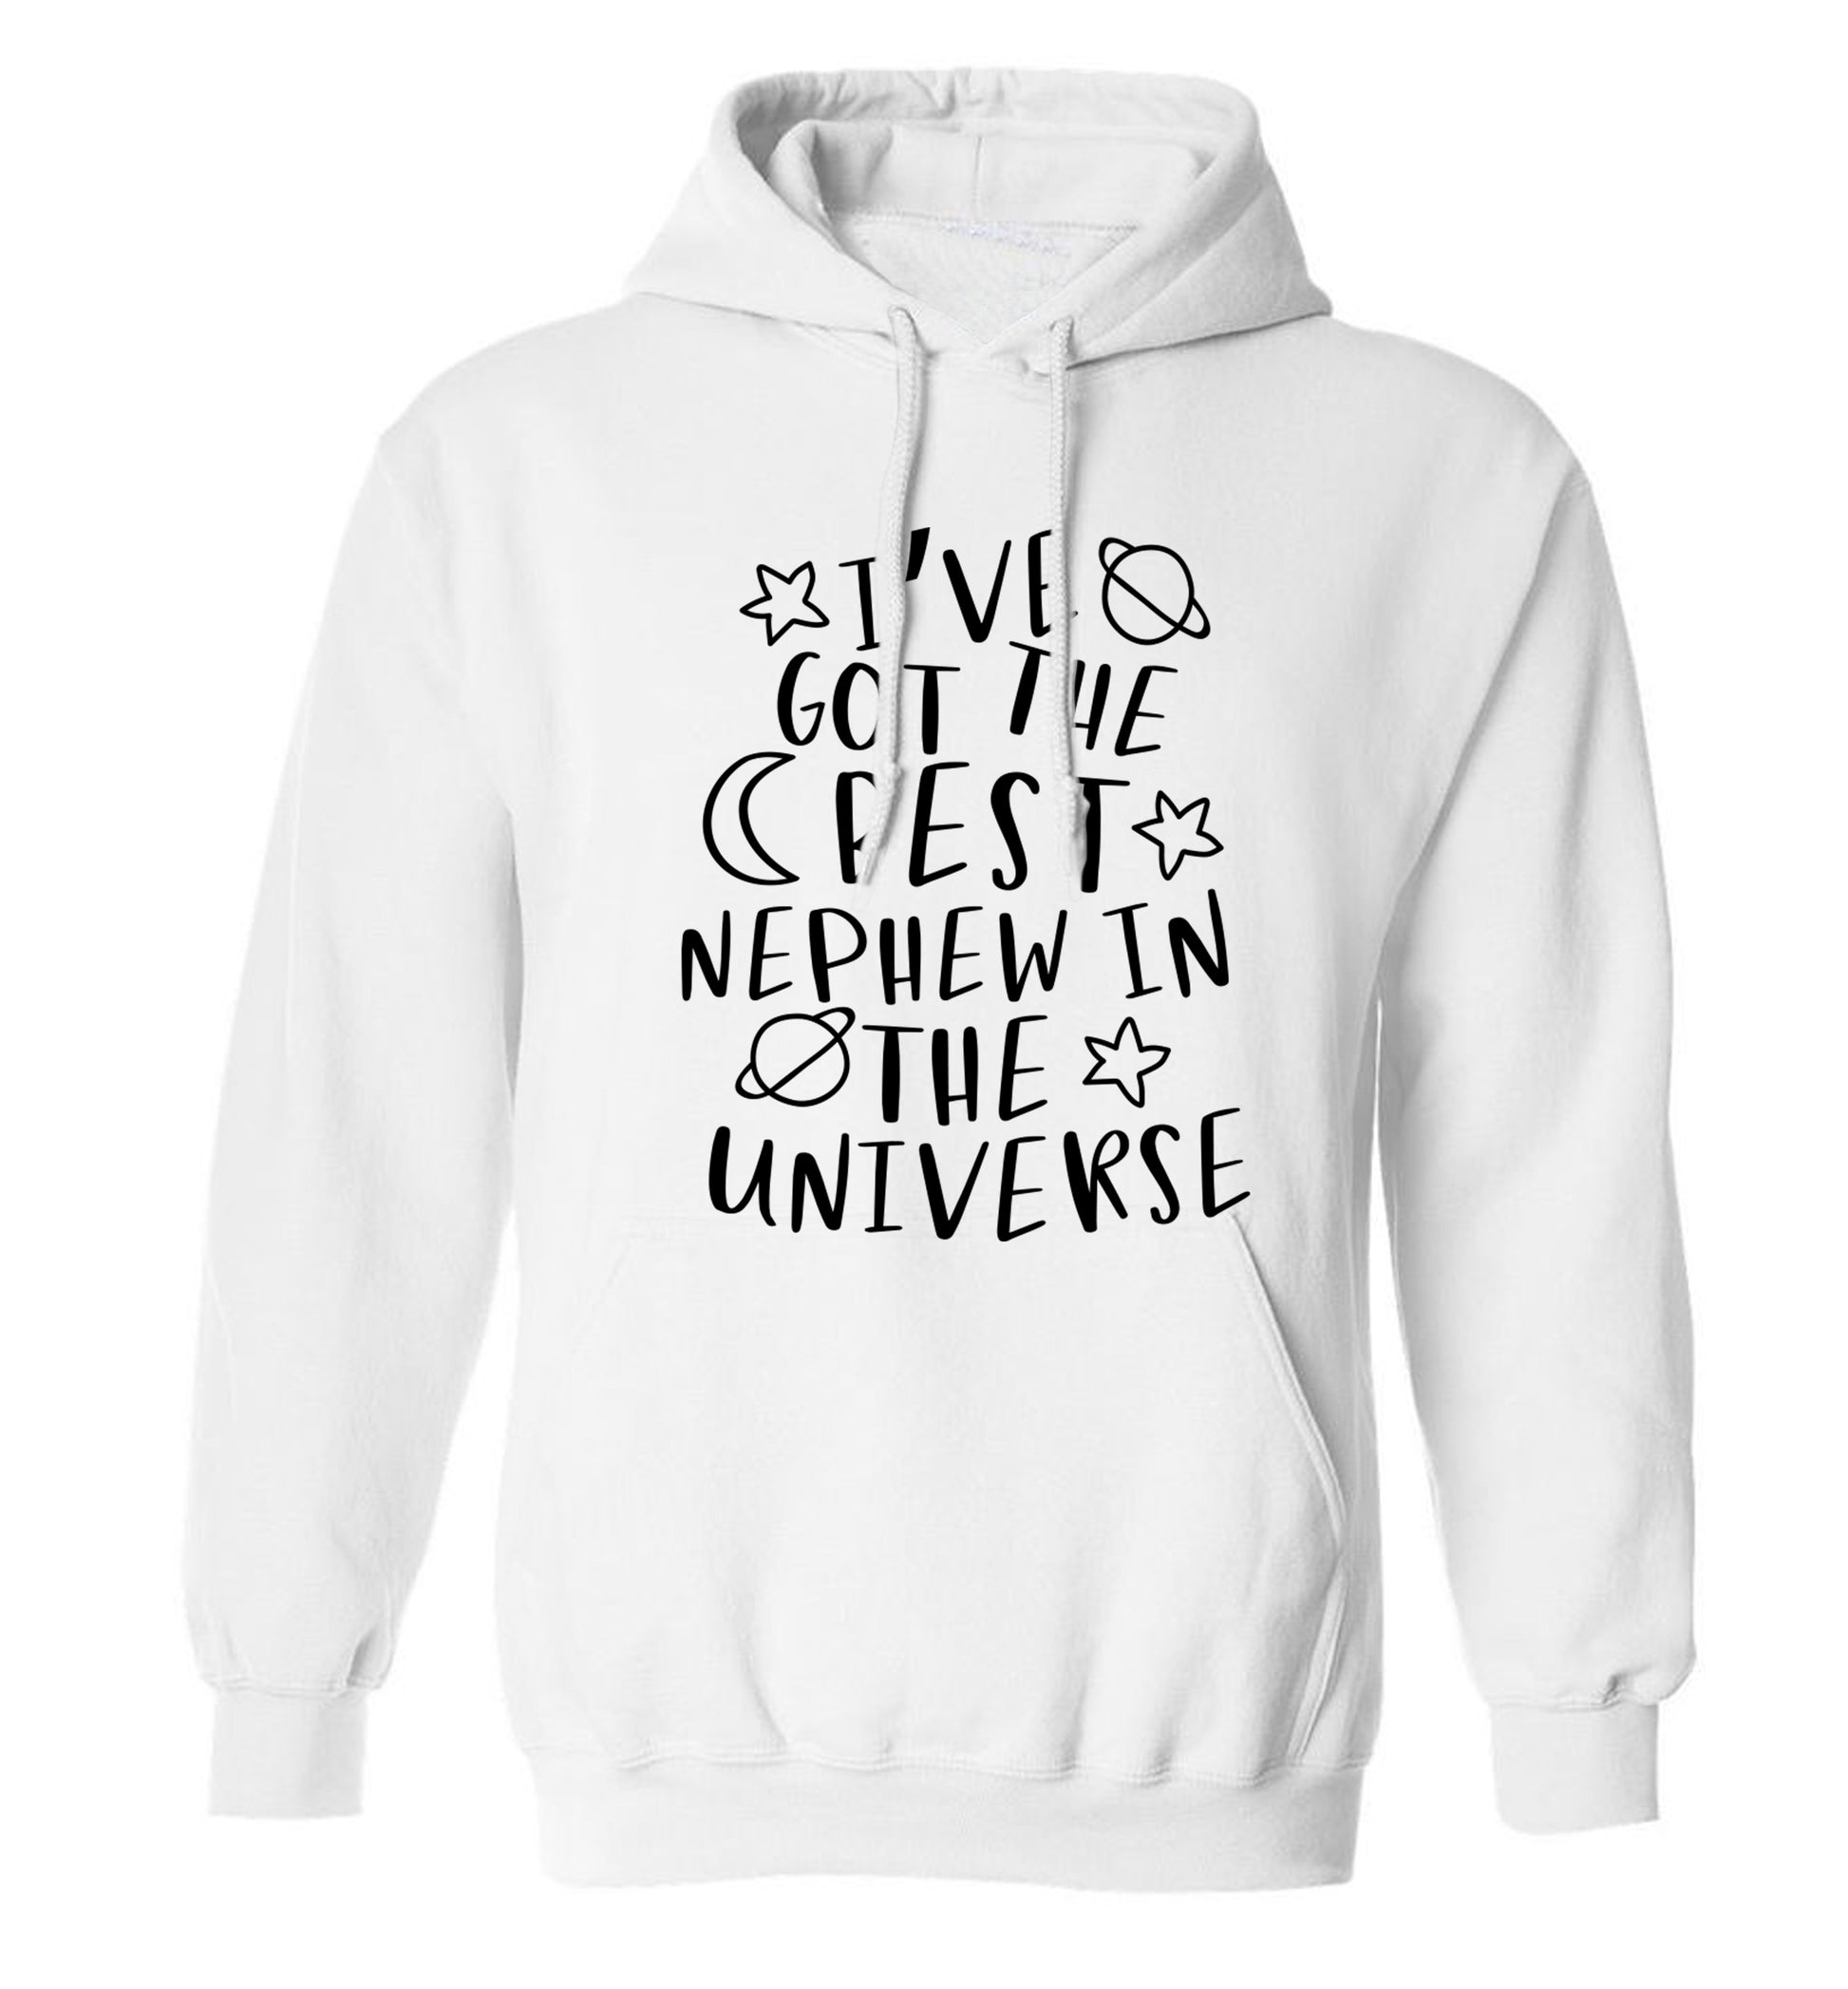 I've got the best nephew in the universe adults unisex white hoodie 2XL